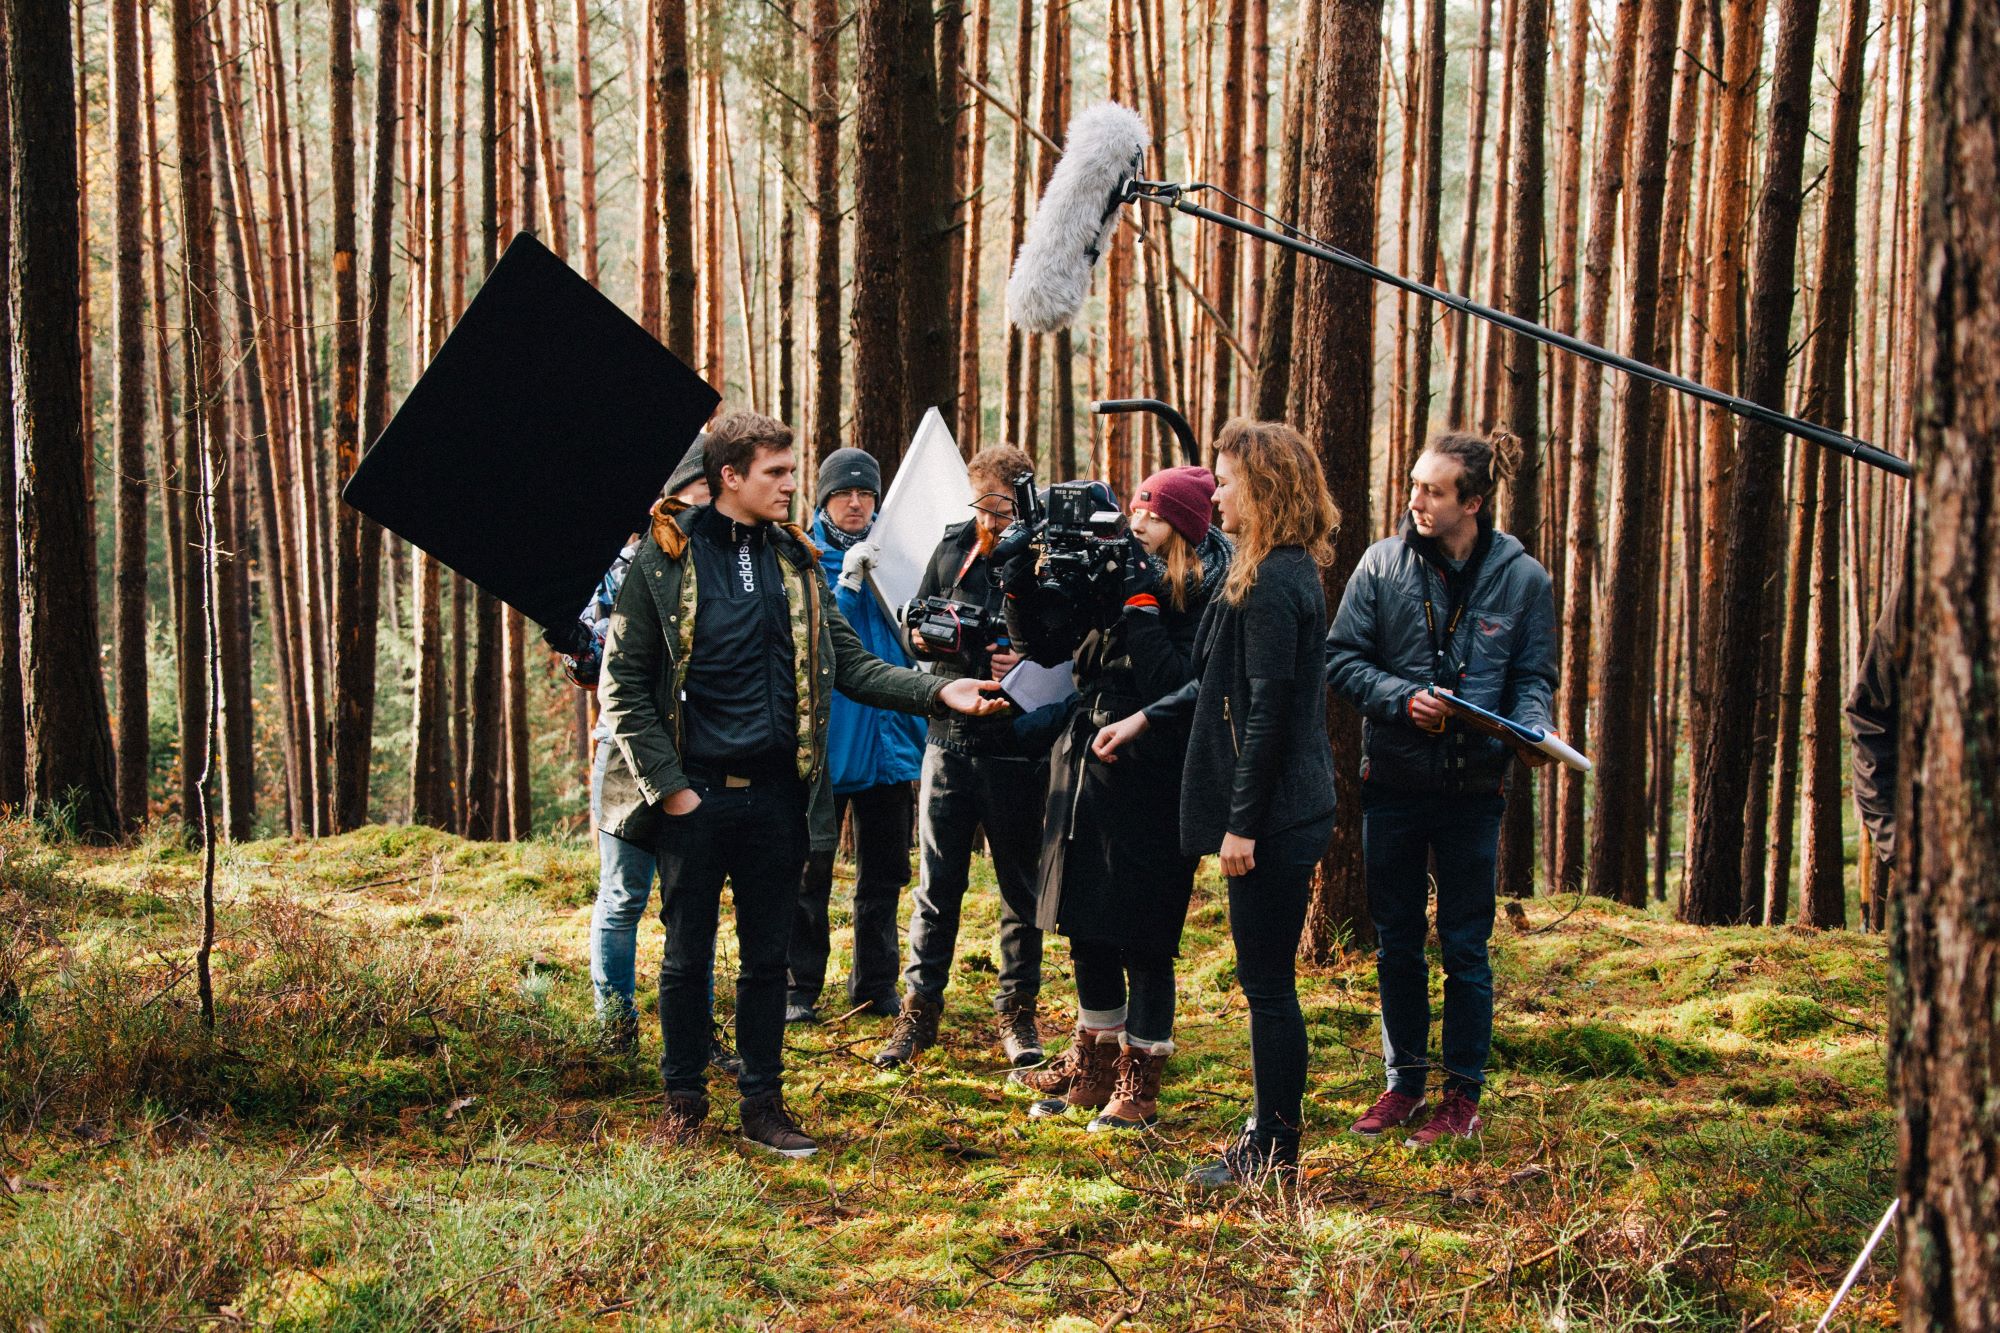 Photo of: Film crew filming movie scene in an outdoor location